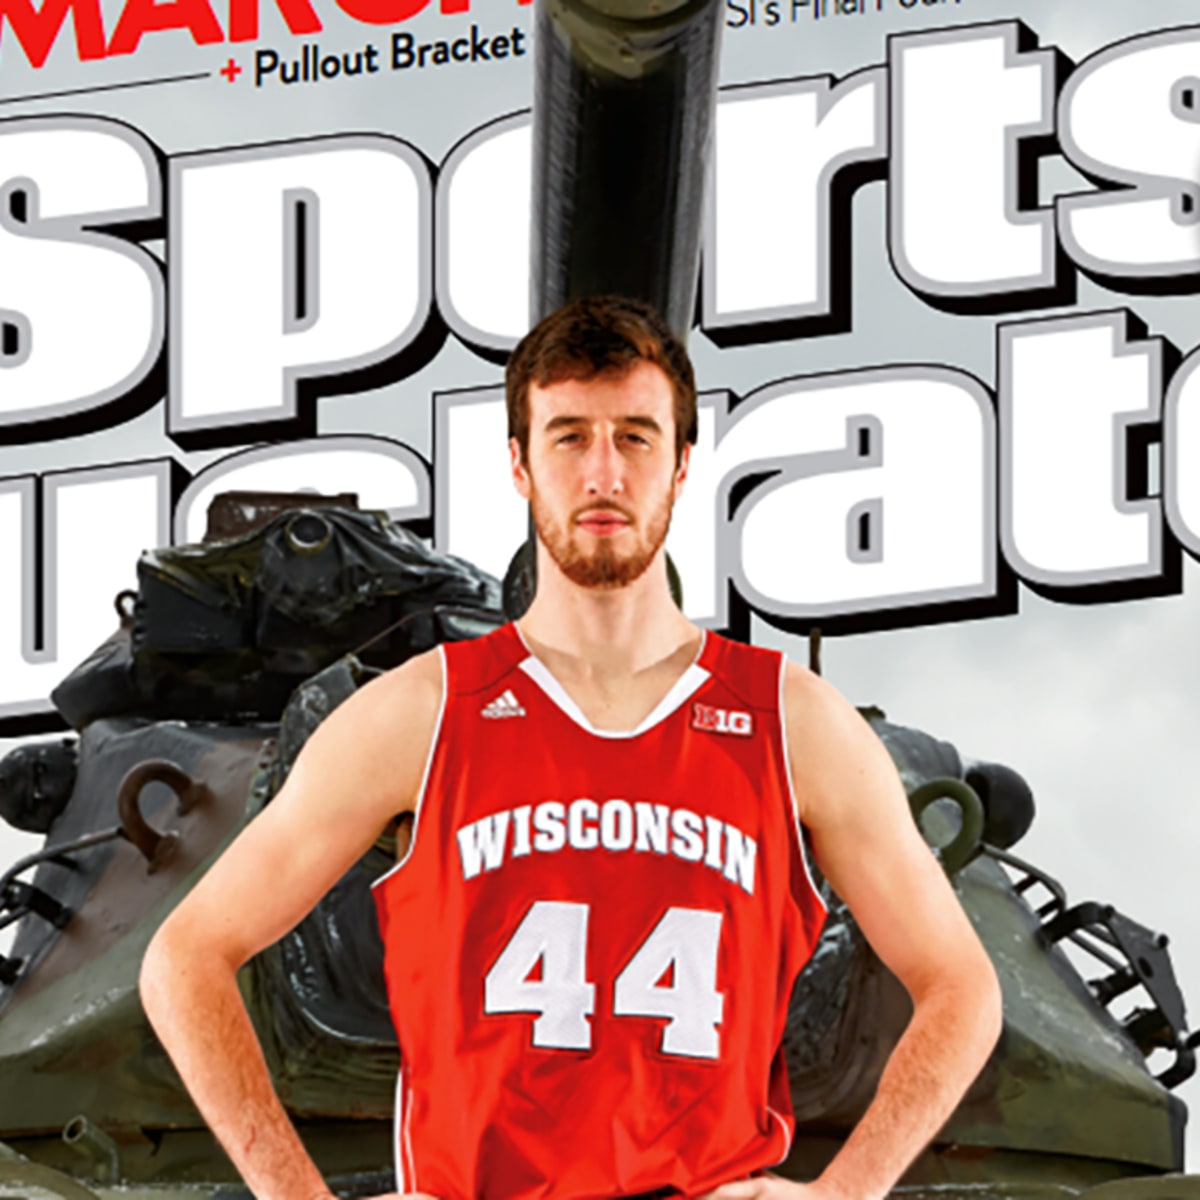 Sports Illustrated covers featuring Wisconsin connections